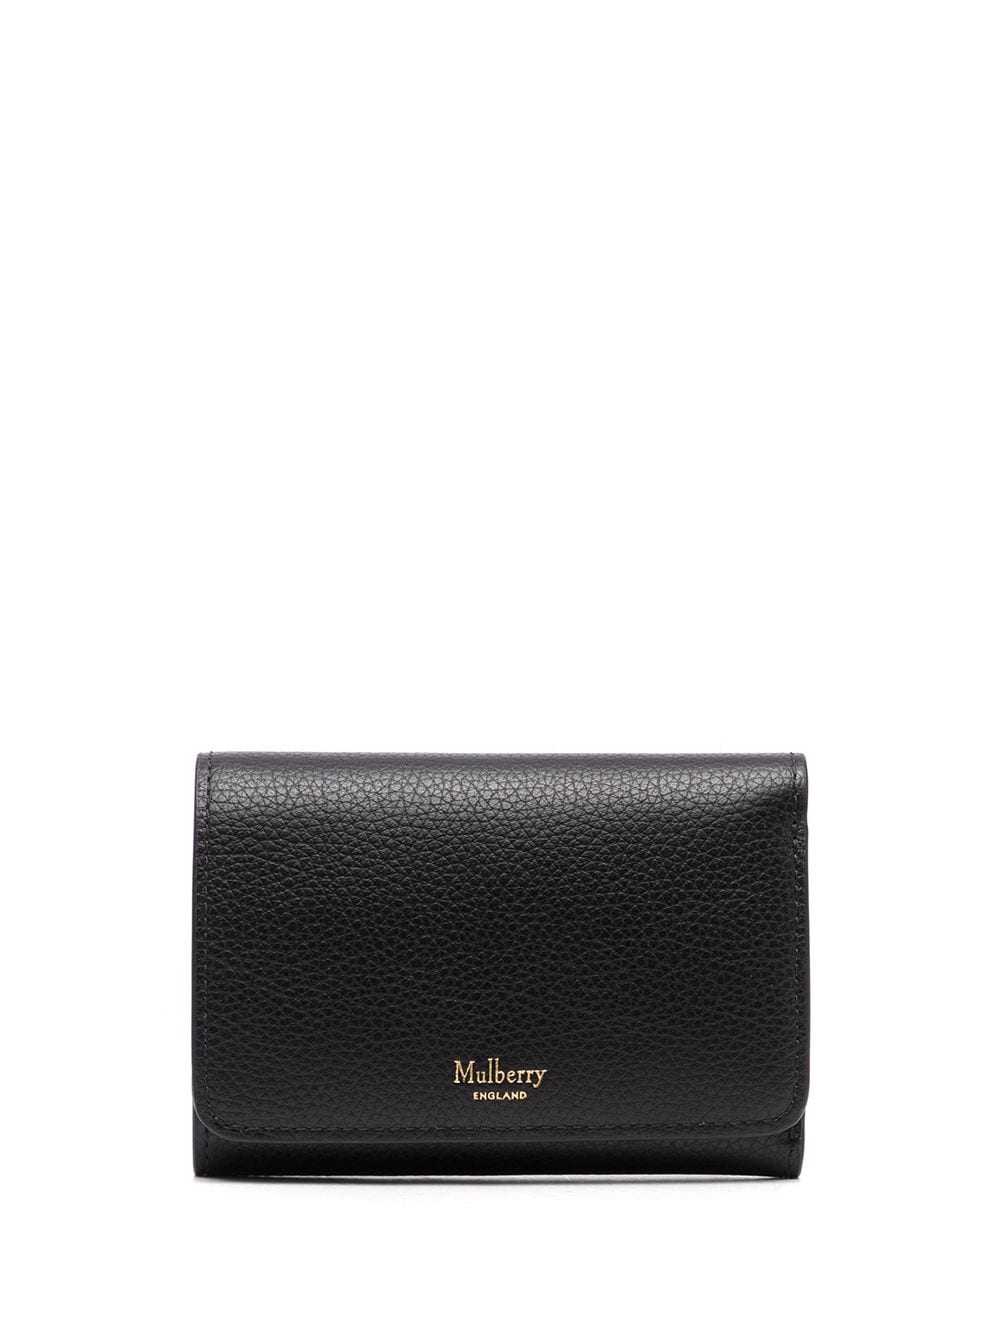 Mulberry continental trifold small classic wallet - Black von Mulberry